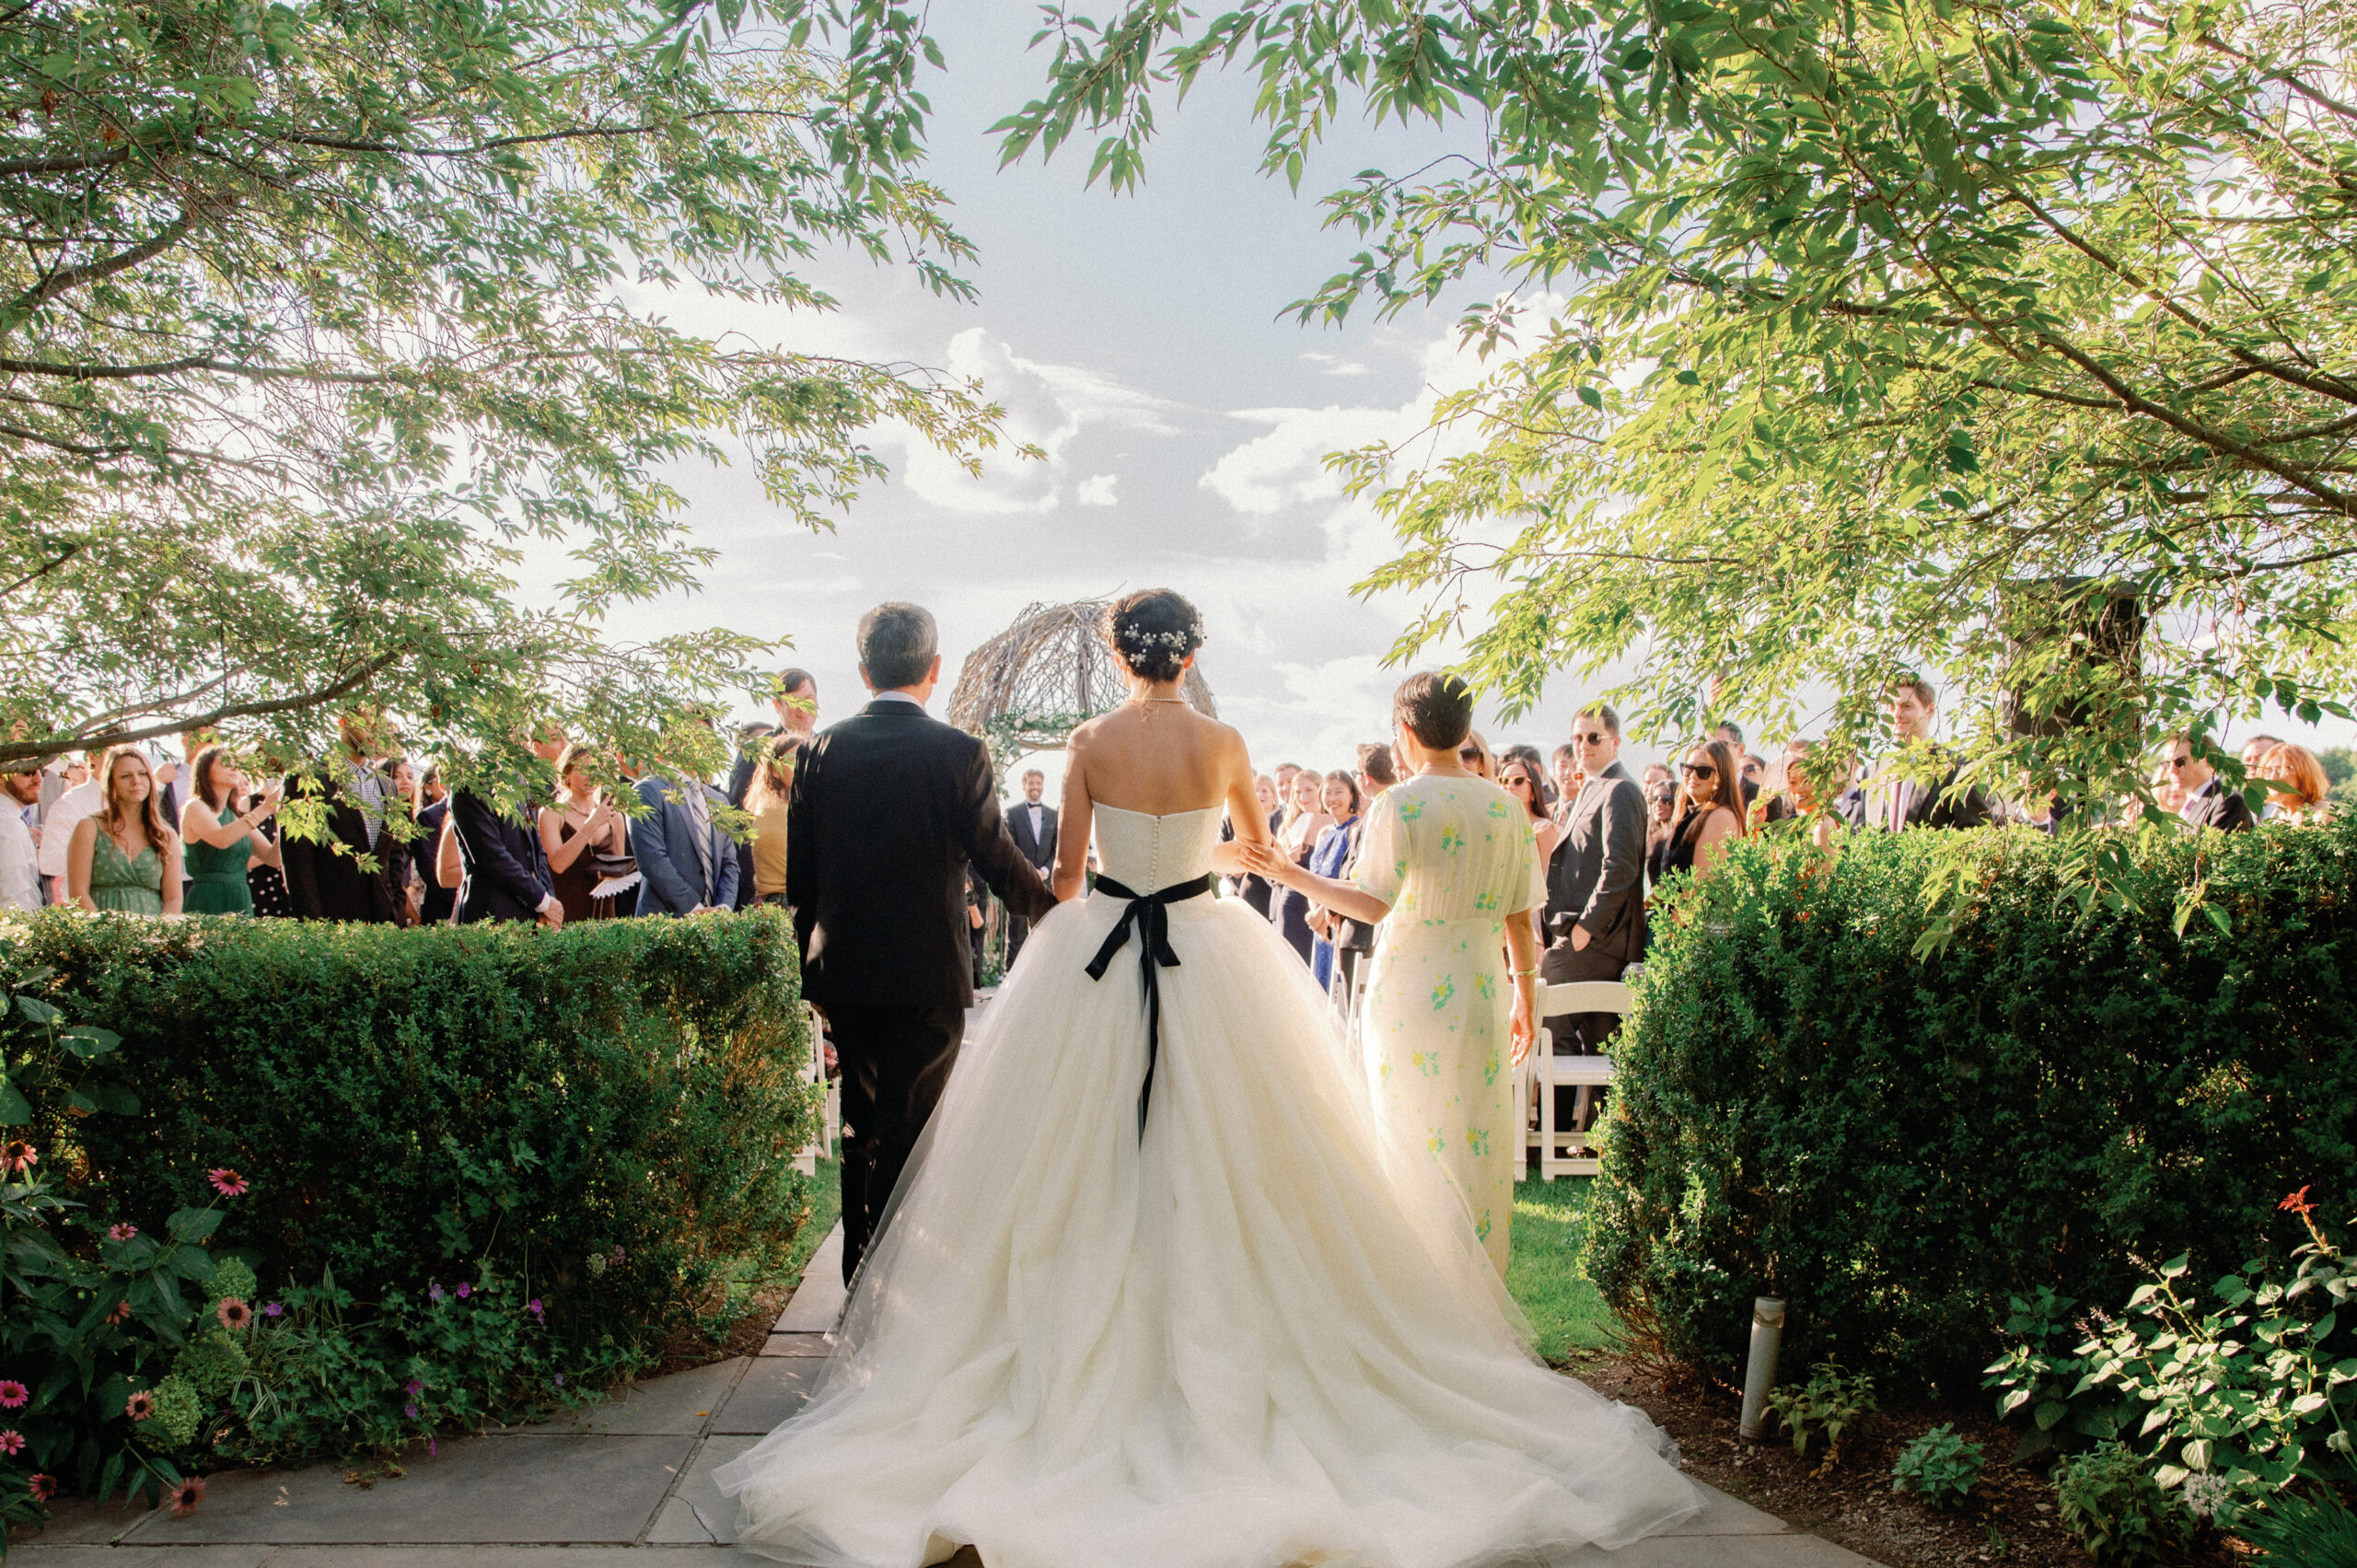 The Bride is walking down the aisle with her mother and father. Image by Jenny Fu Studio